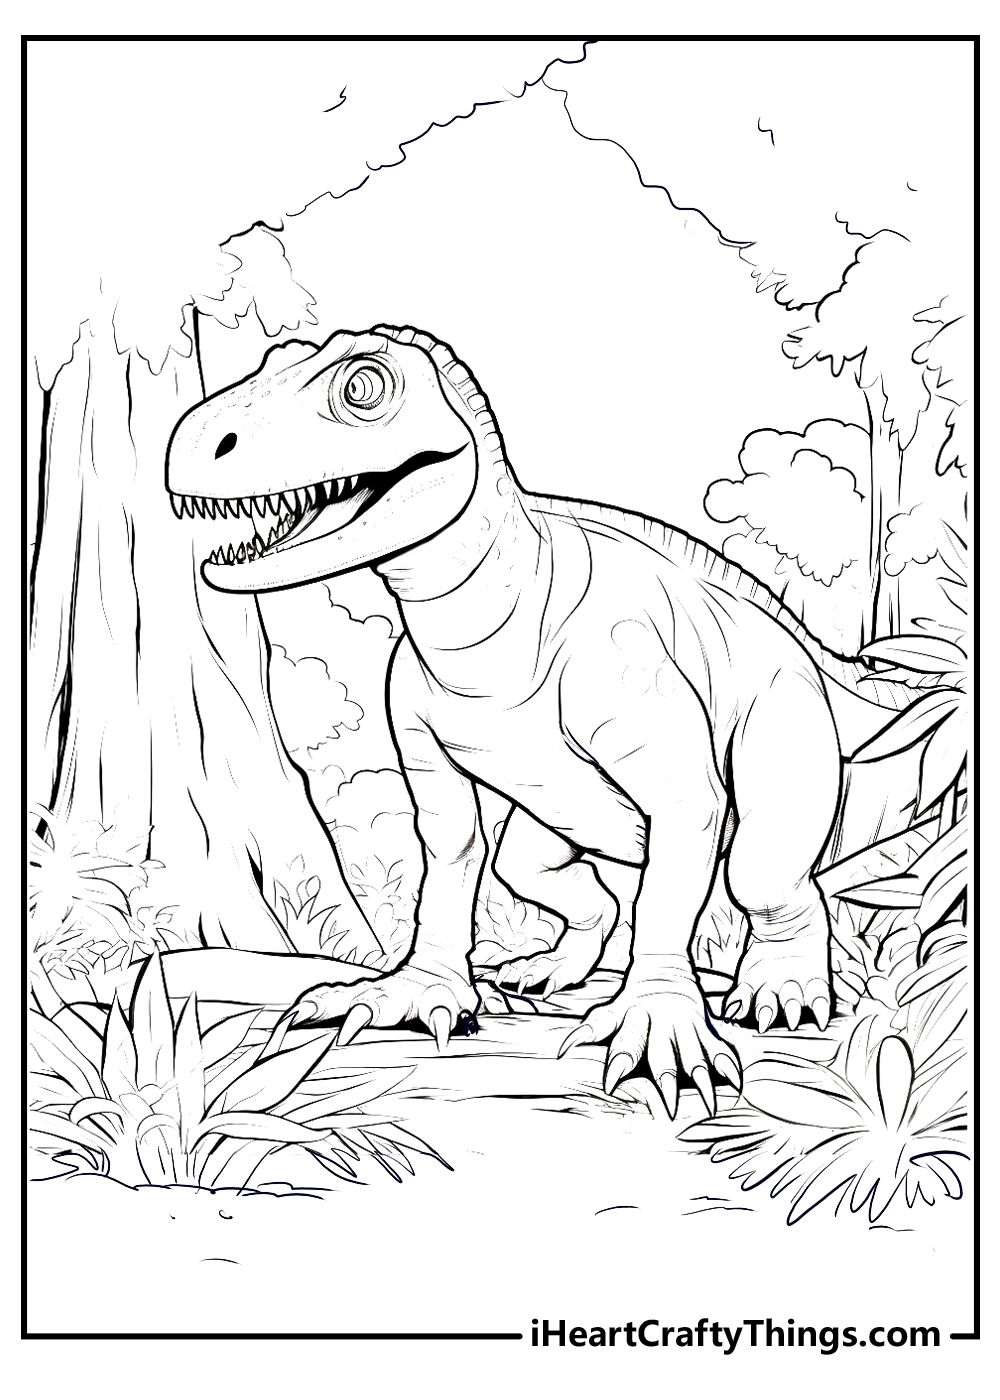 Jurassic park coloring pages for kids